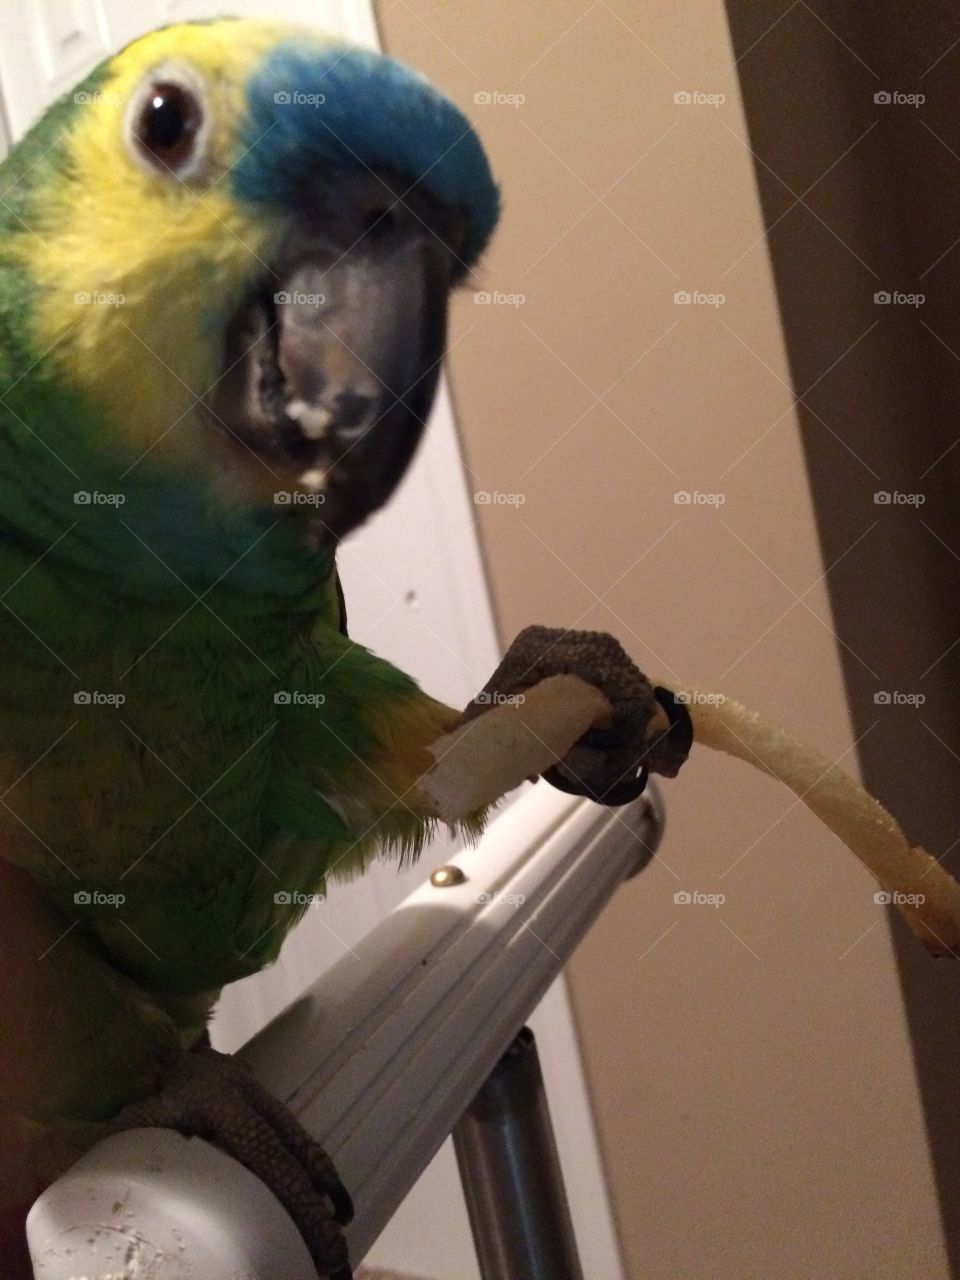 Parrot eating a French fry